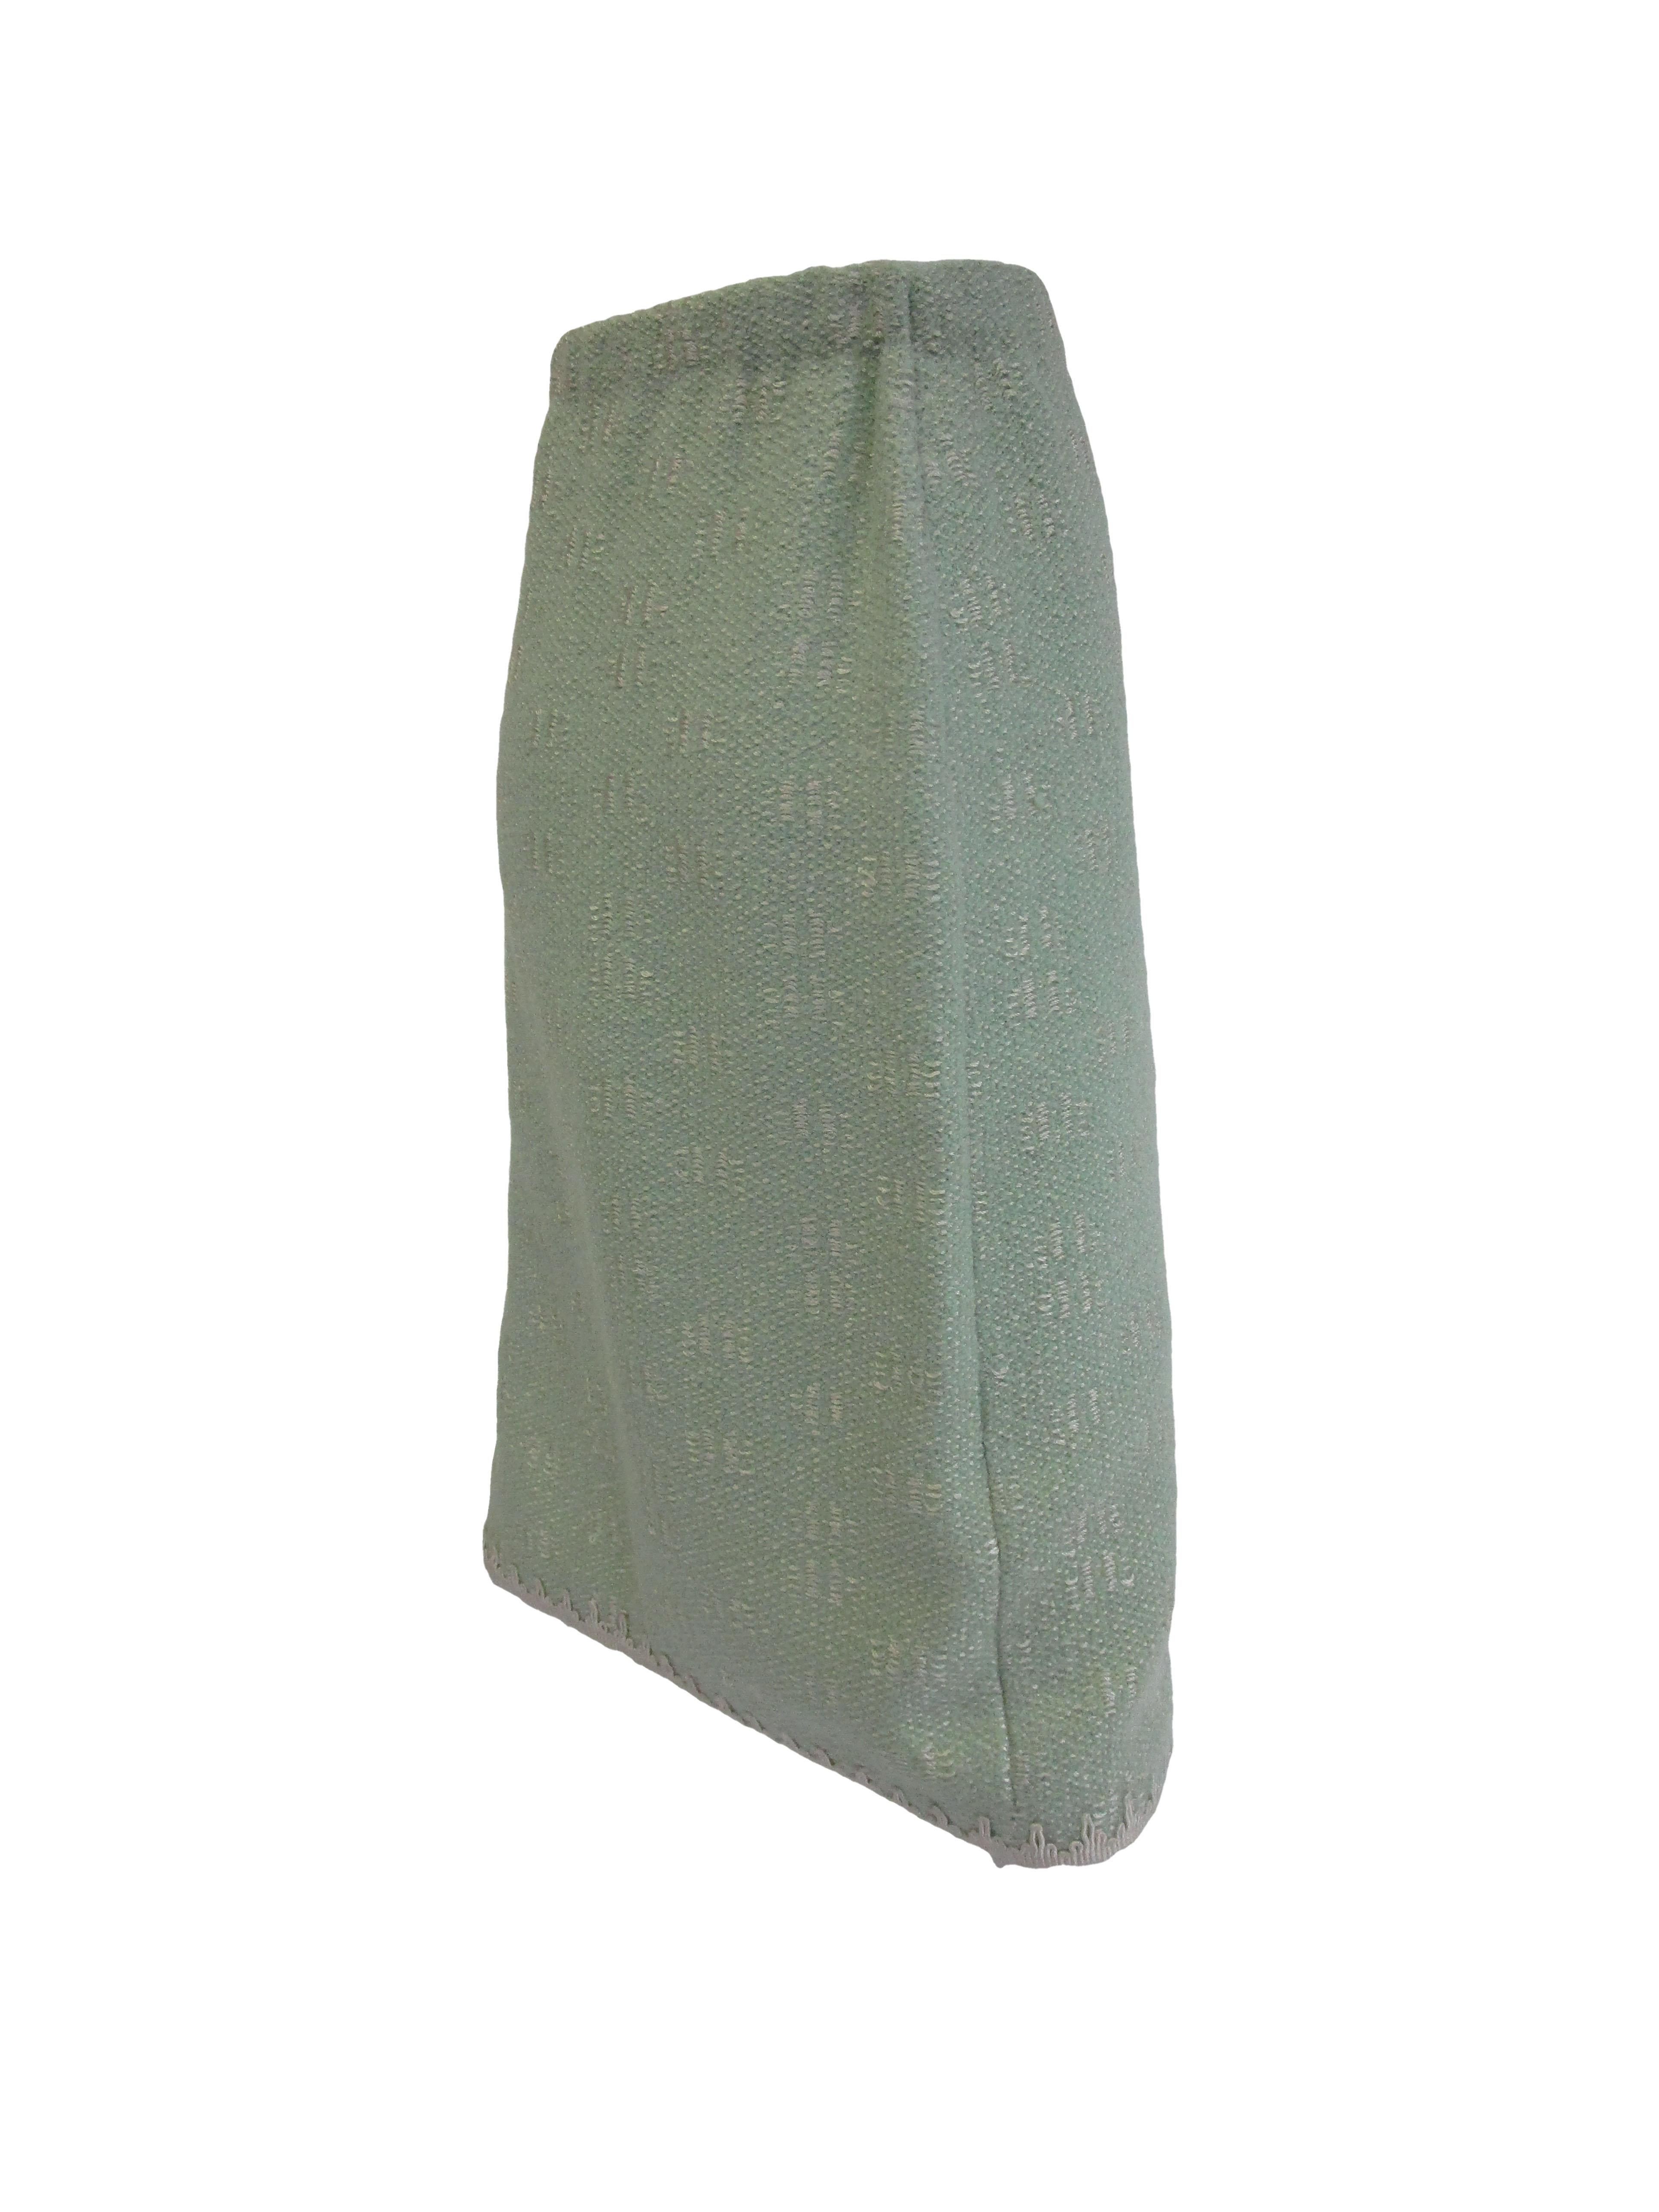 1970s Adolfo Mint Green Wool Knit Skirt and Jacket For Sale 7